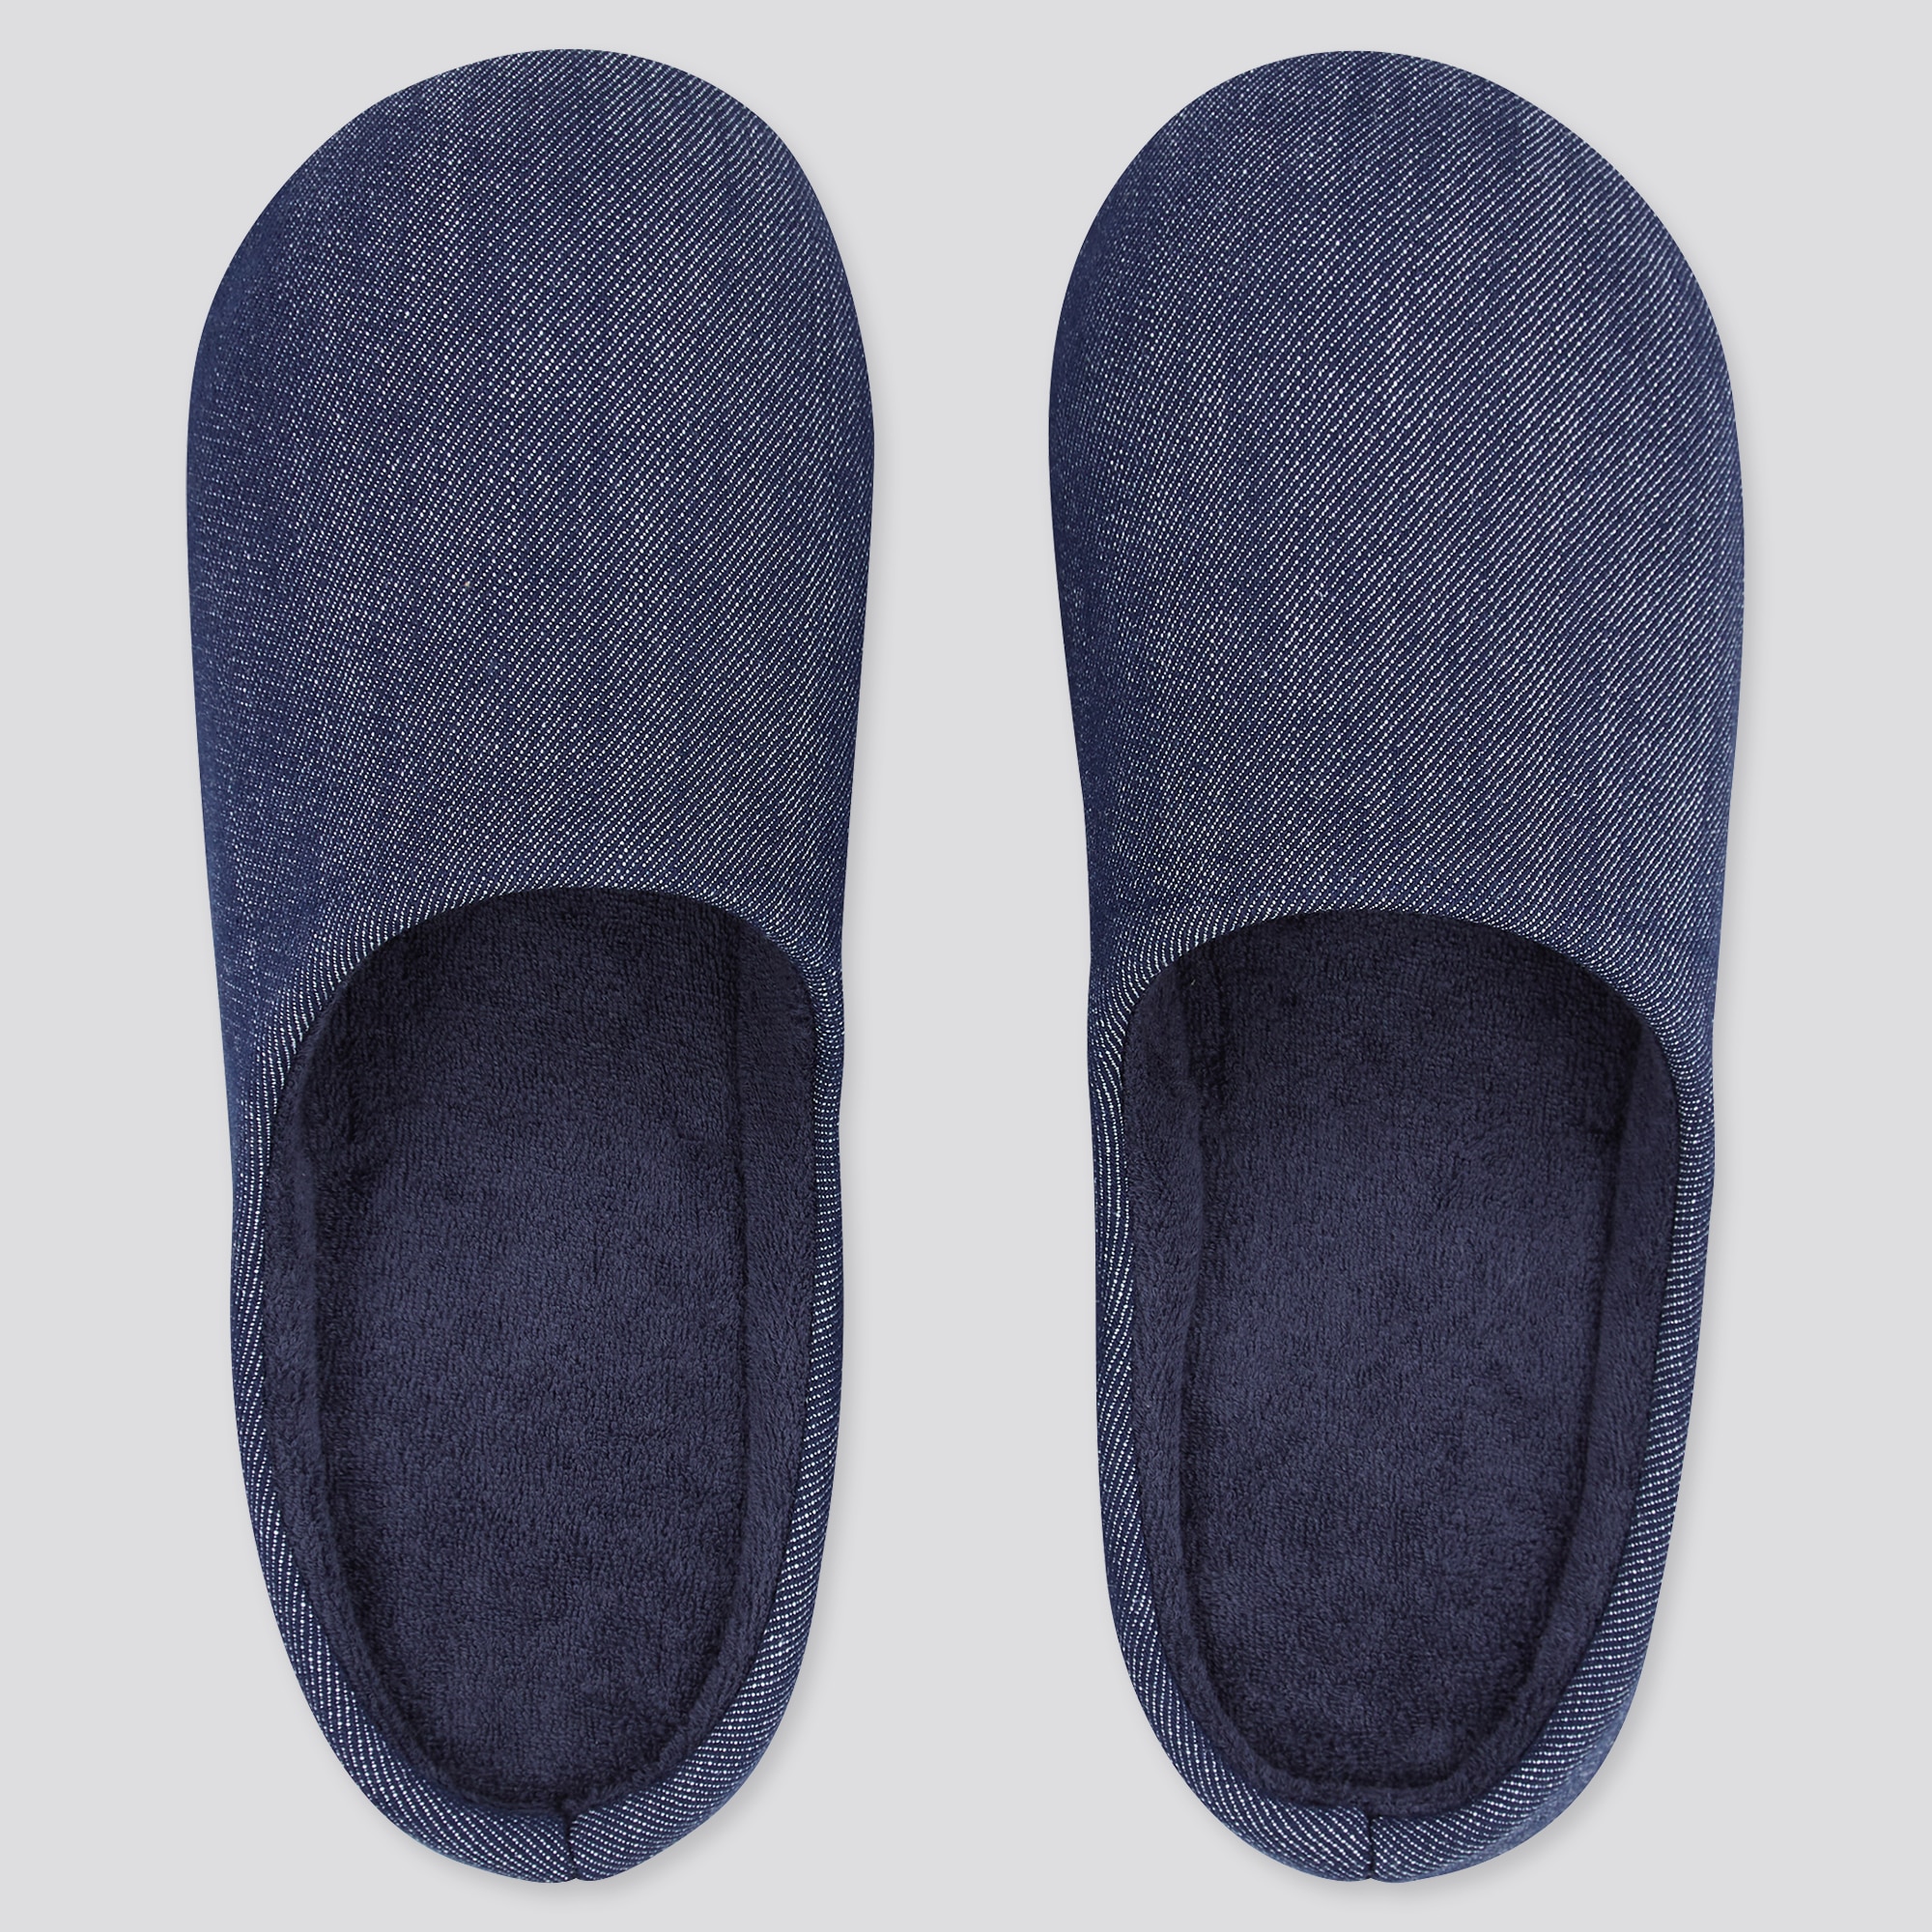 ALTEK Slippers For Men | Daily Use Home Flip-Flops | Chappals Flat Soft  Rubber Sole